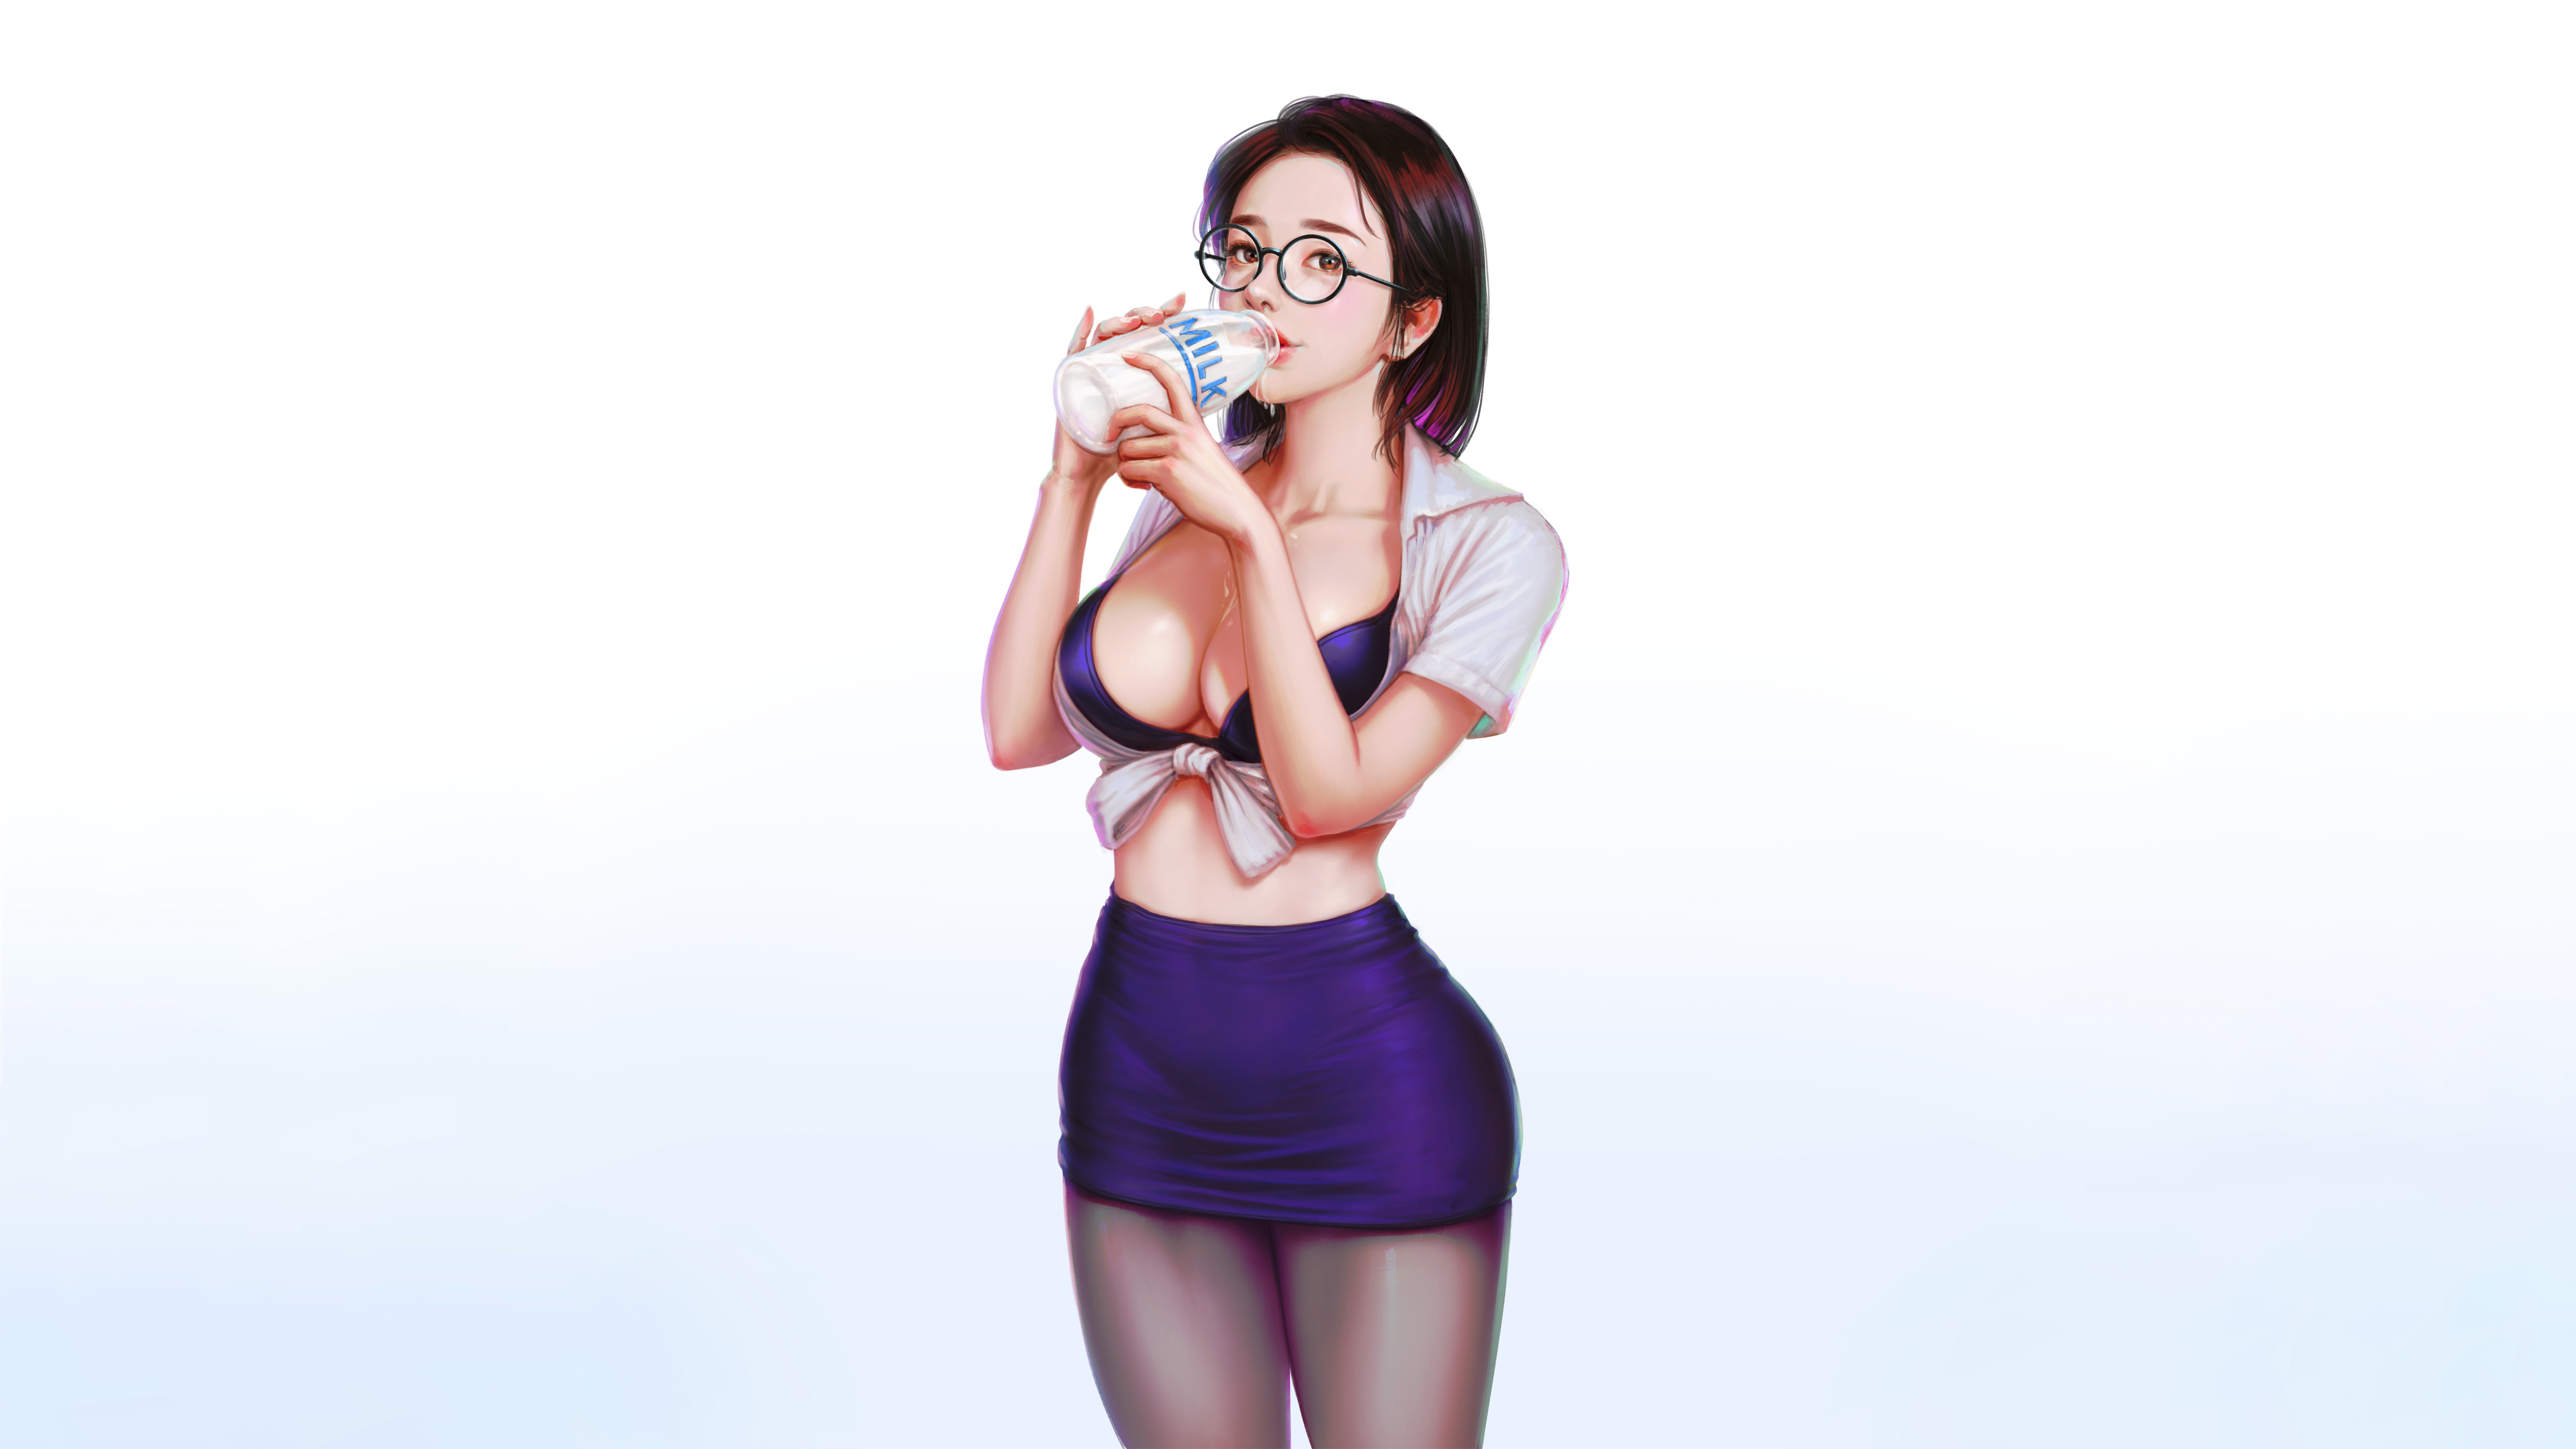 General 5504x3096 LightBox drawing women glasses milk drinking problems drinking skirt bra tied top simple background white background